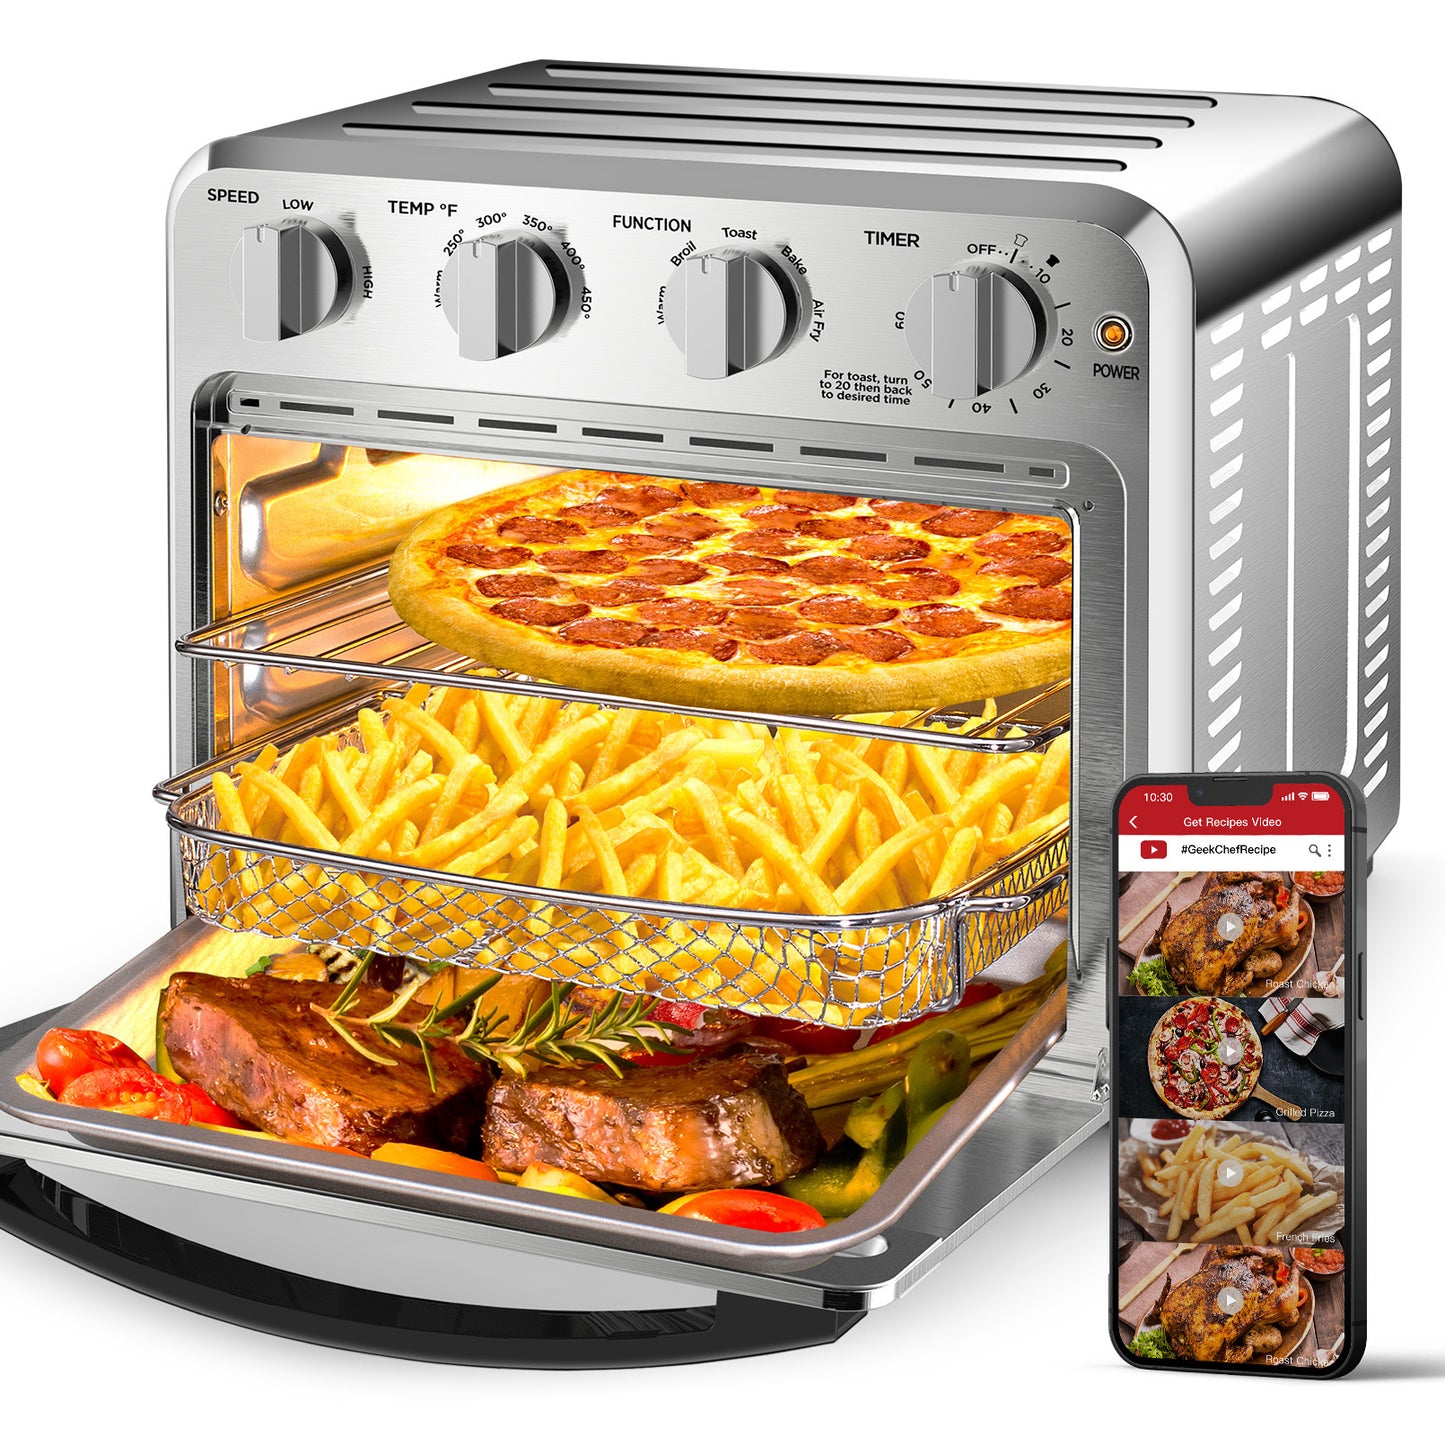 Geek Chef Air Fryer Toaster Oven Combo;  4 Slice Toaster Convection Air Fryer Oven Warm;  Broil;  Toast;  Bake;  Air Fry;  Oil-Free;  Accessories Included;  Stainless Steel;  Silver;  16QT